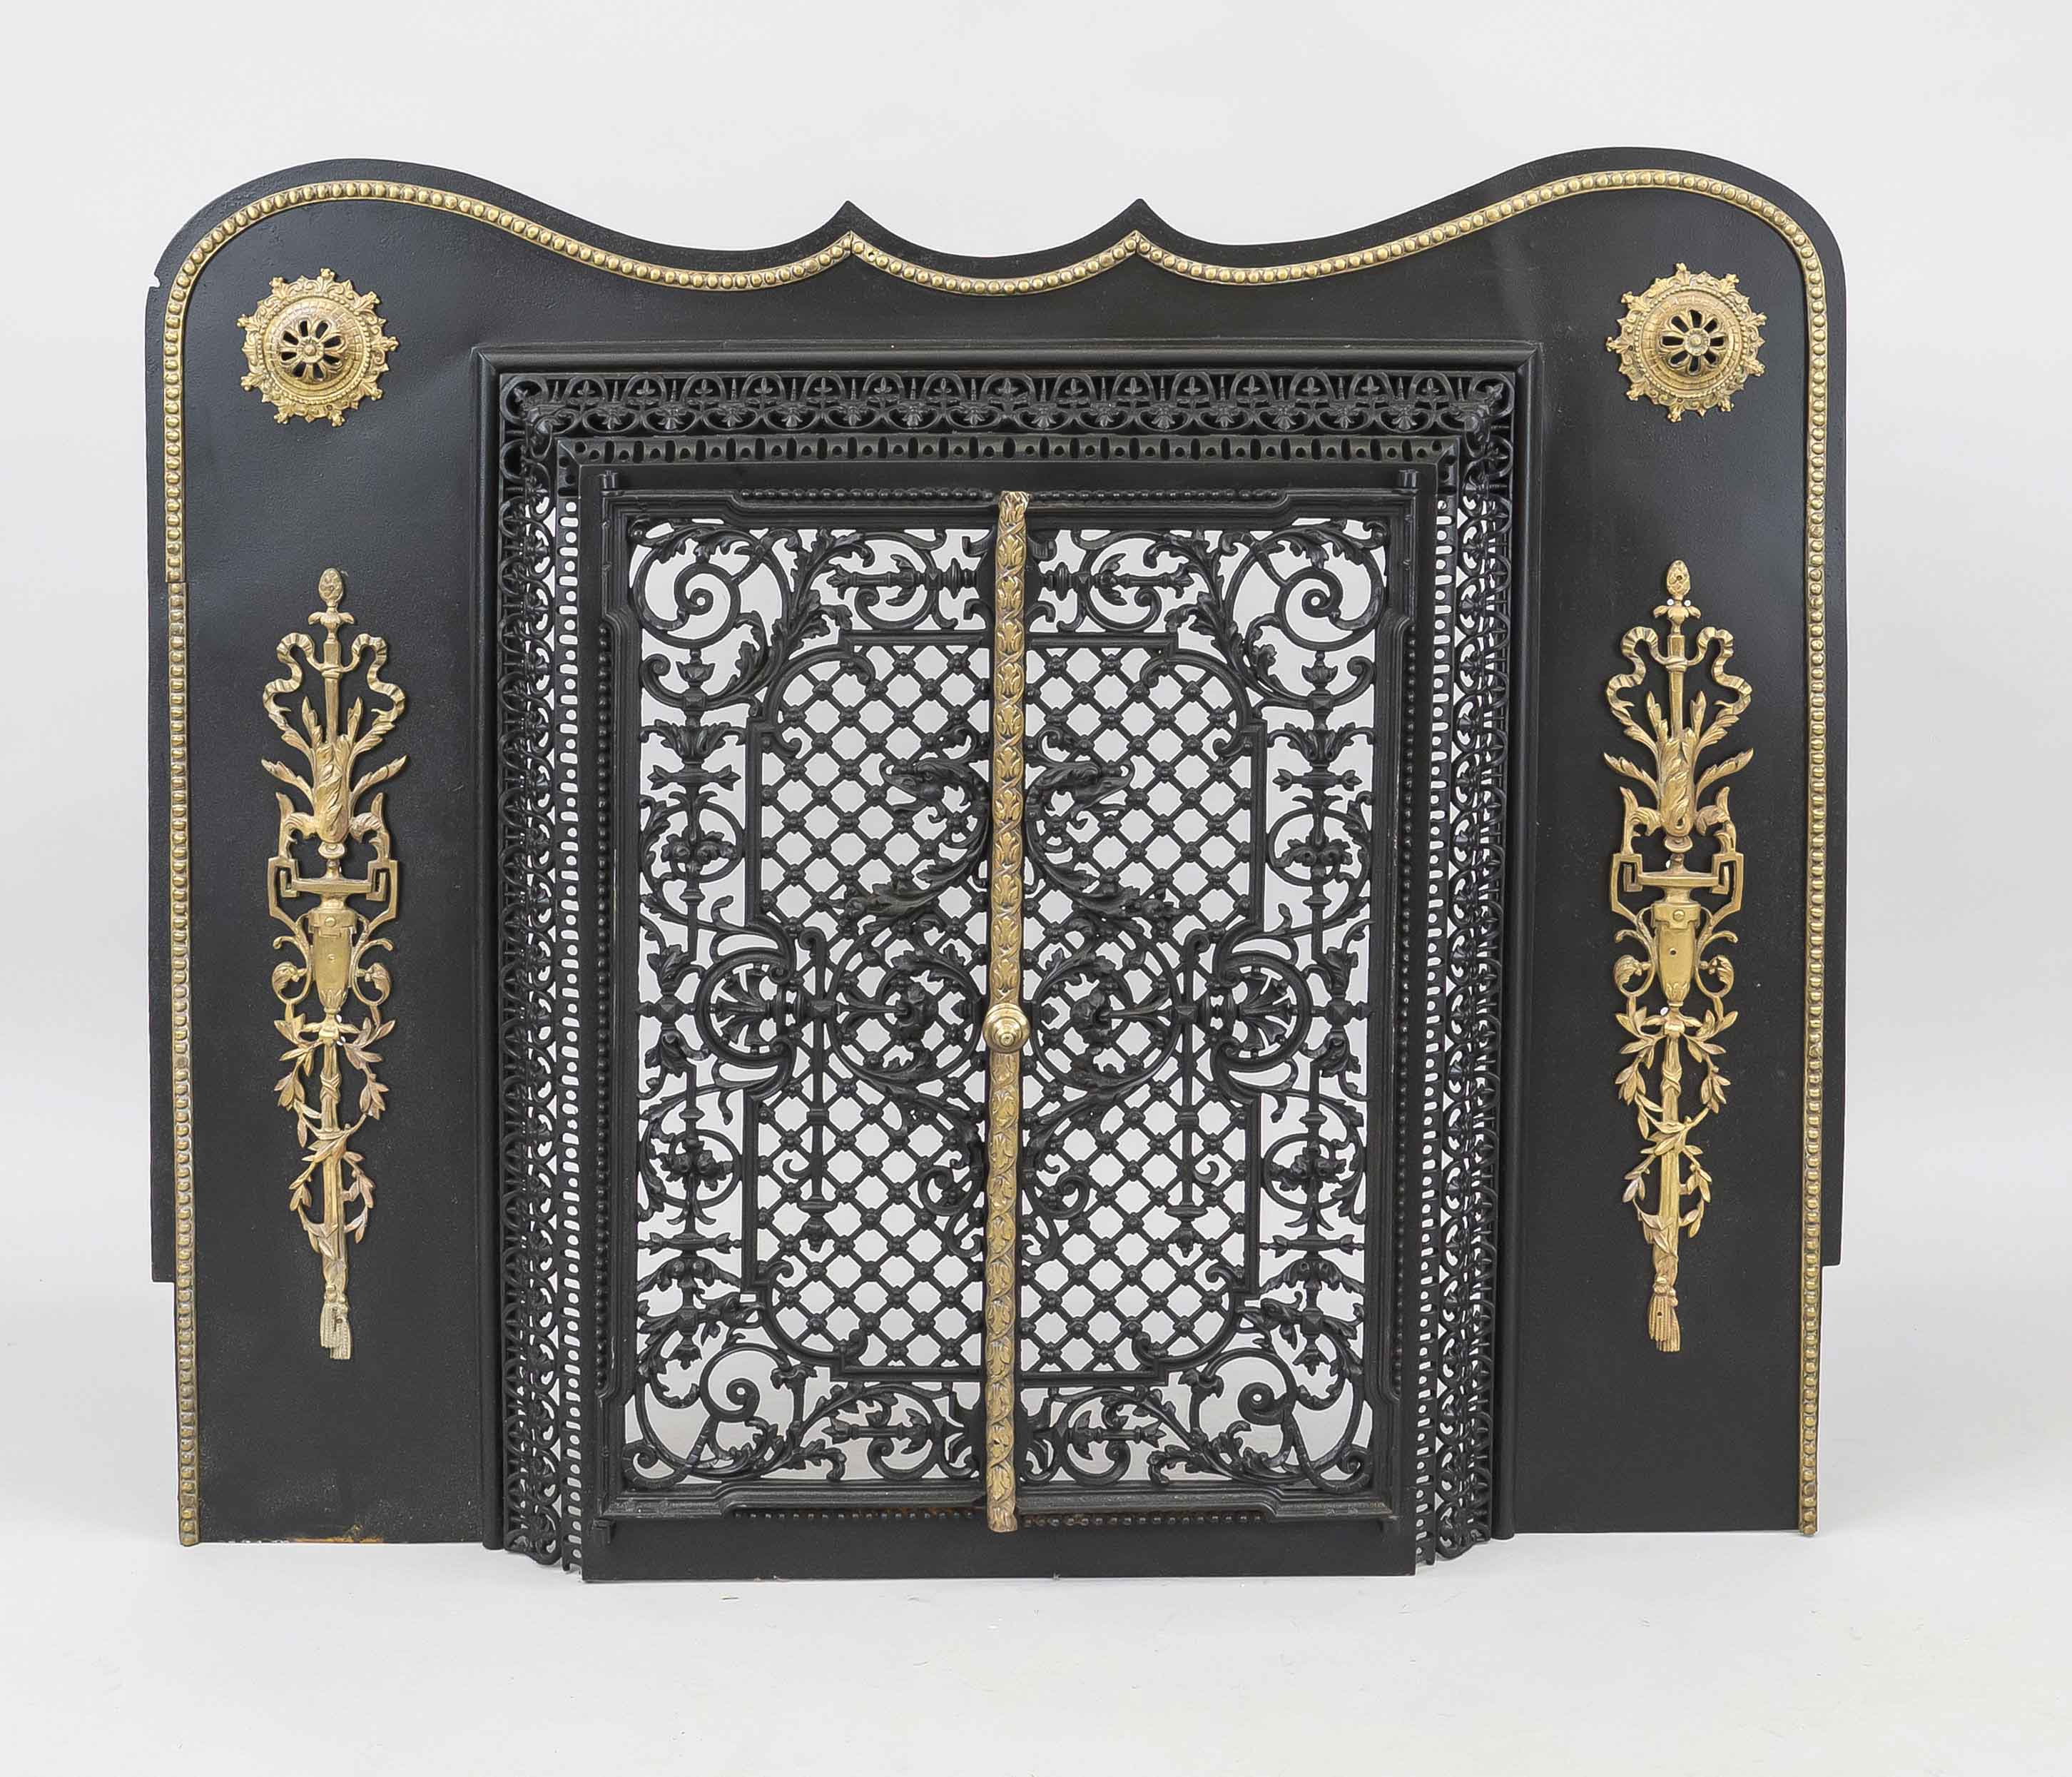 Fireplace porch, late 19th century, painted iron black, brass. Curved panel with decorative